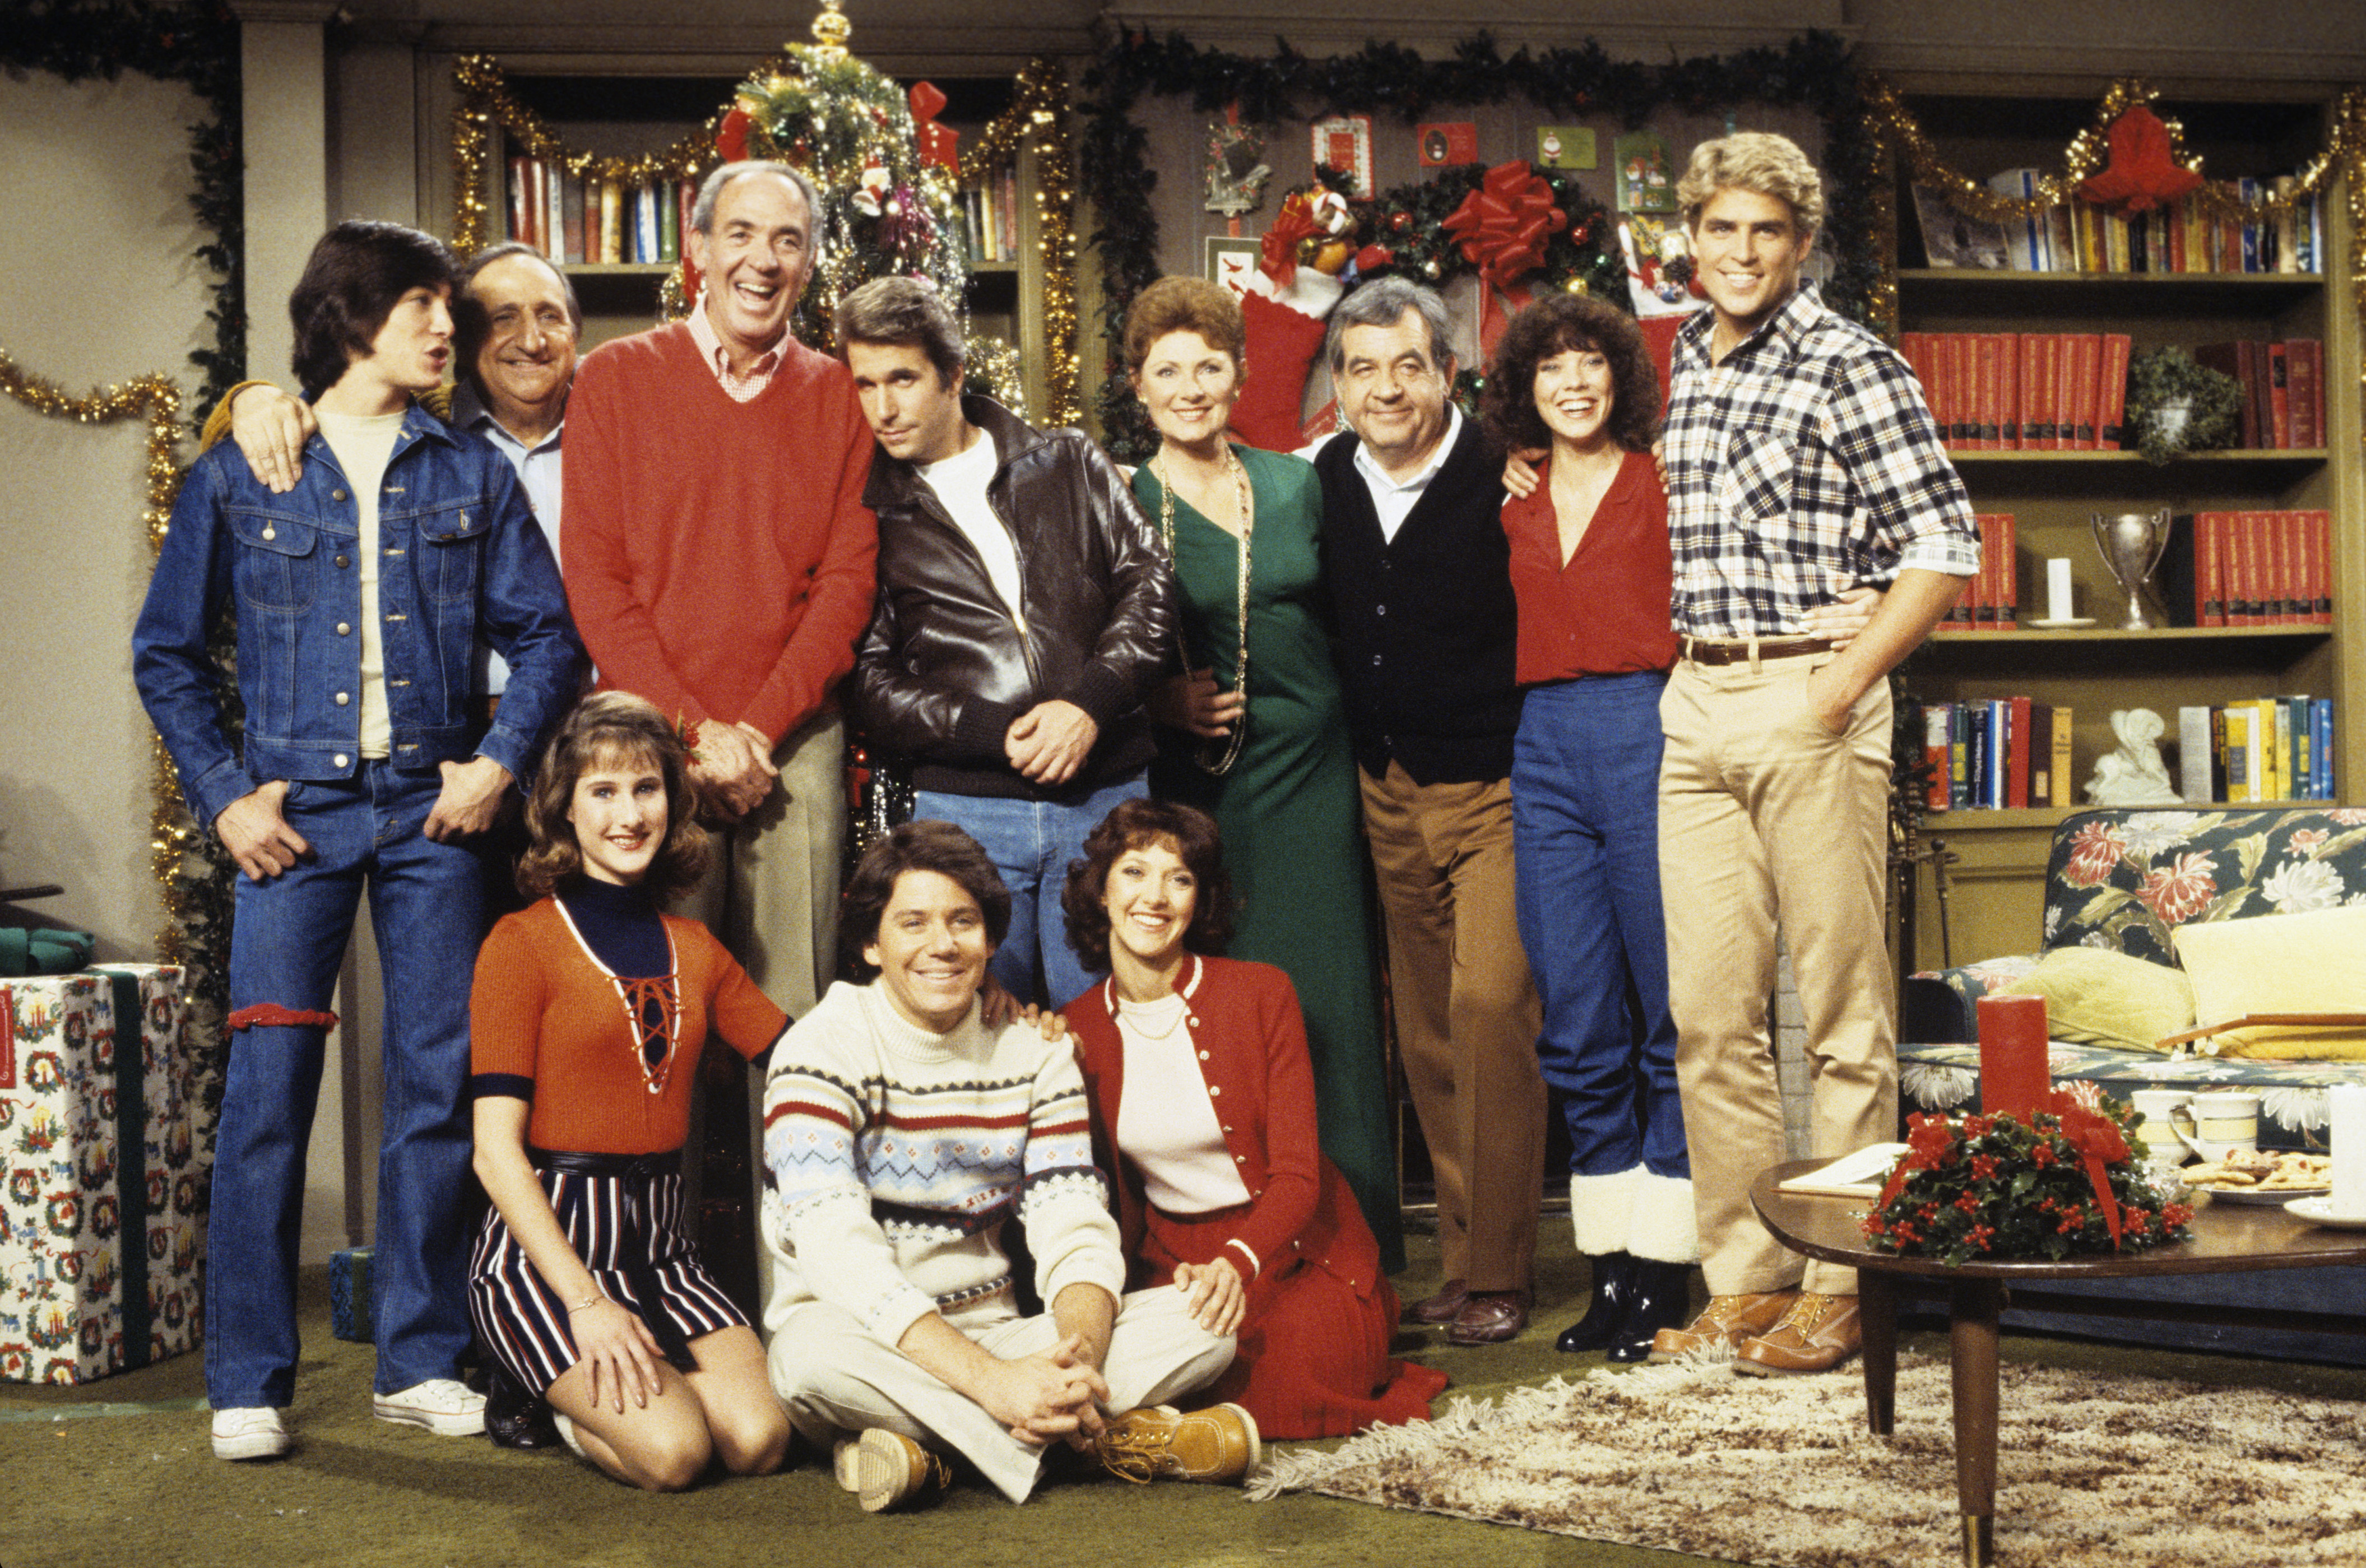 Erin Moran (second standing from the right) and co-stars on the set of "Happy Days" on December 16, 1980 | Source: Getty Images